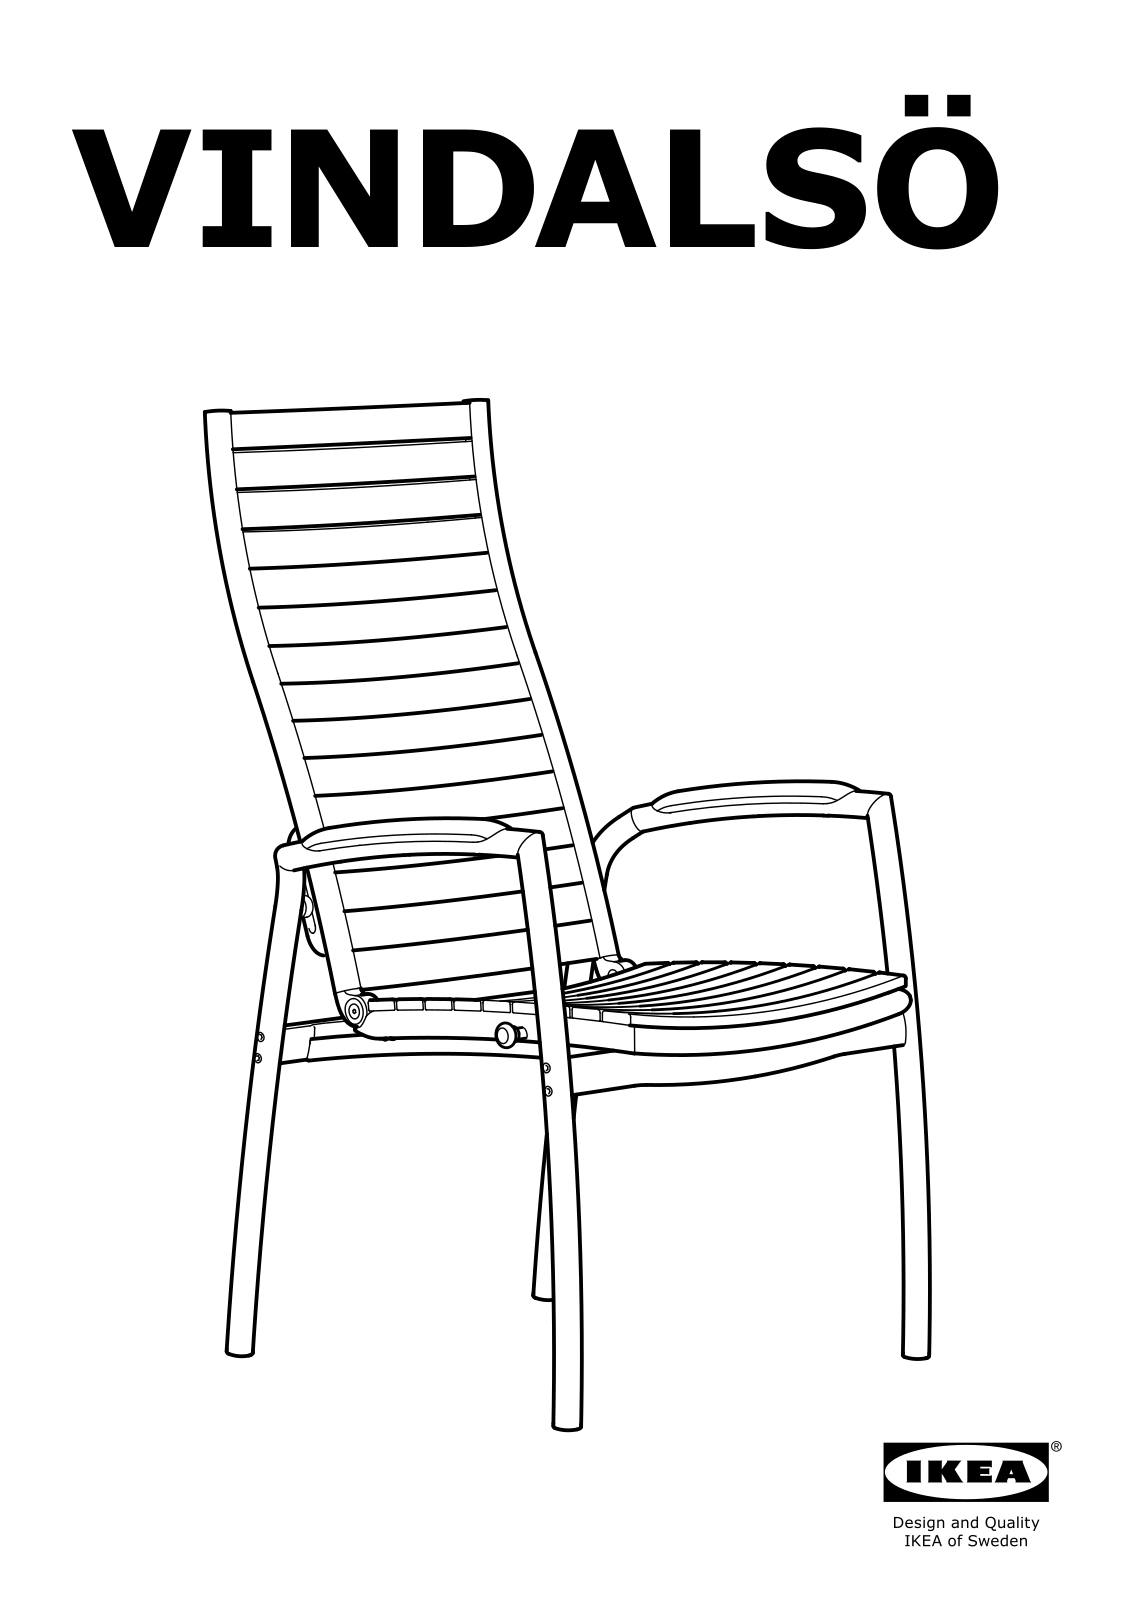 IKEA VINDALSO User Manual